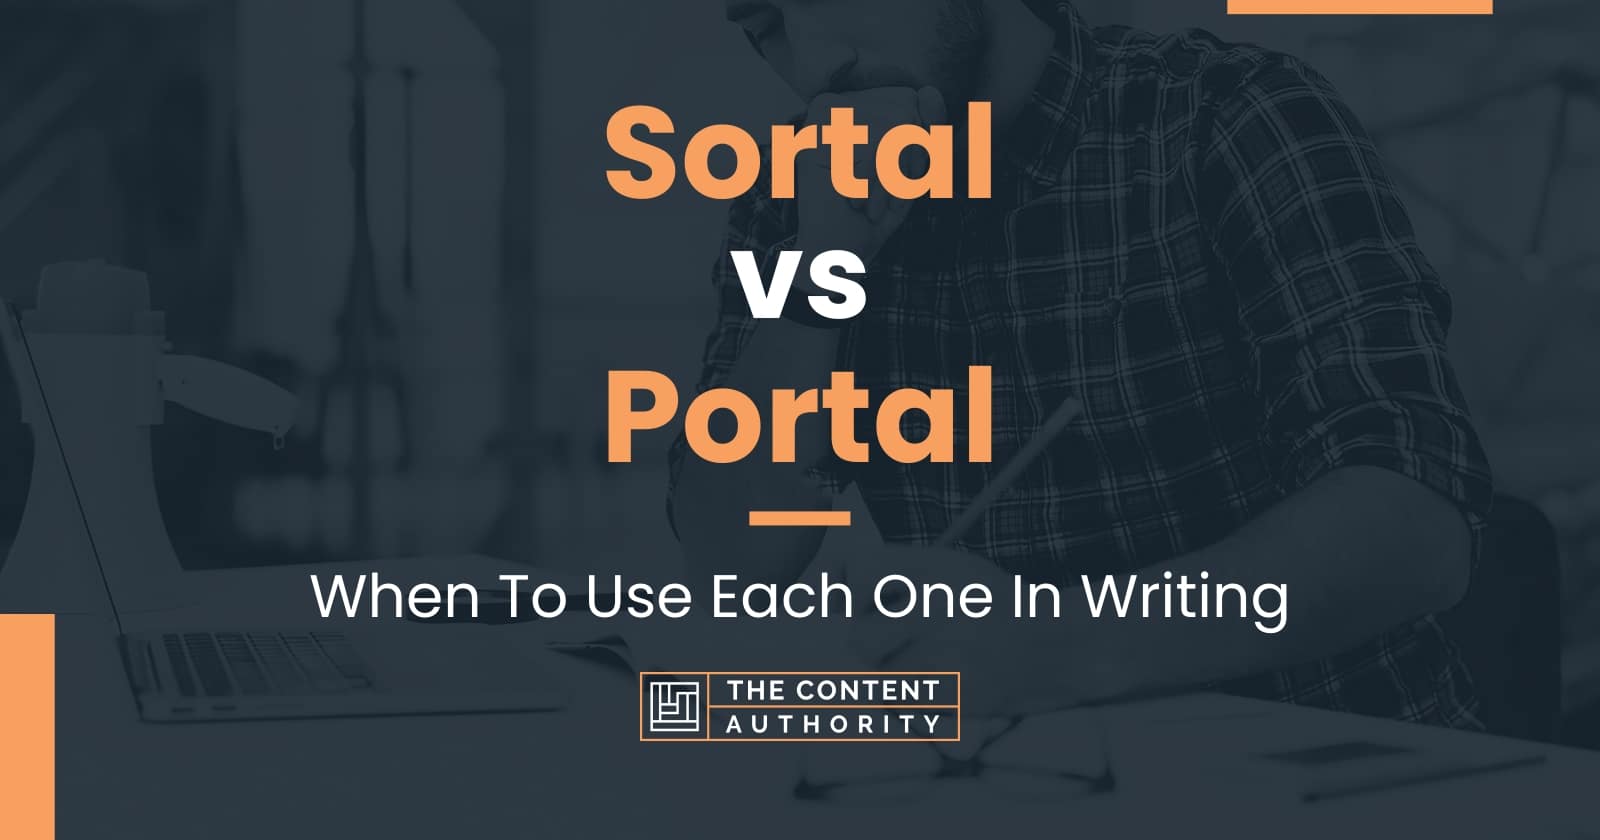 Sortal vs Portal: When To Use Each One In Writing